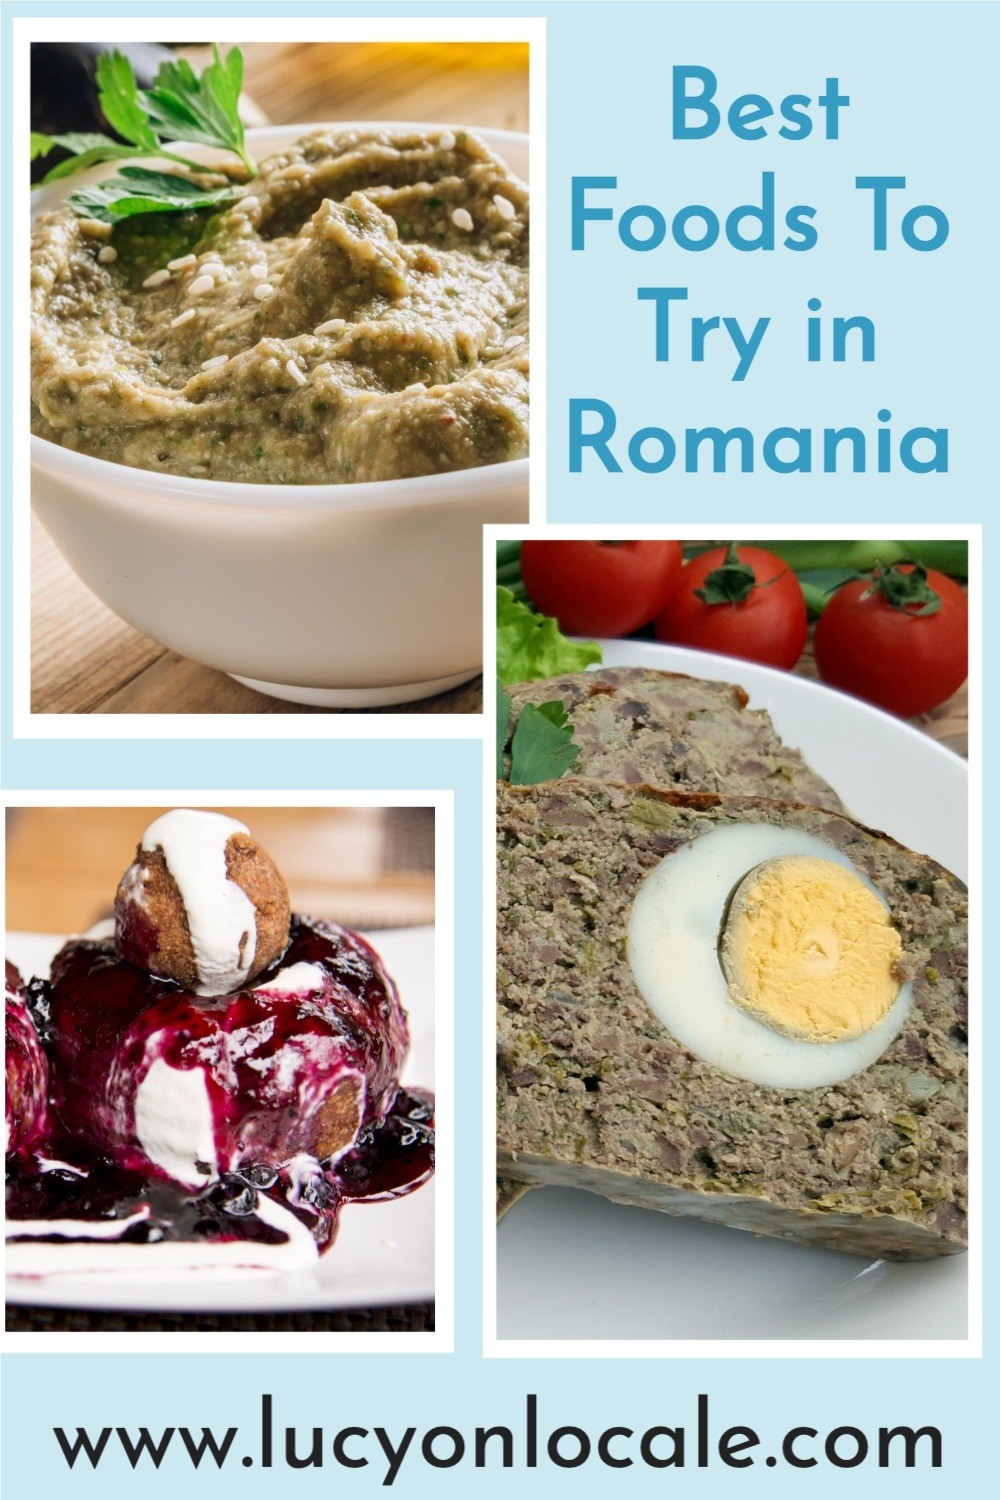 The best foods to try in Romania